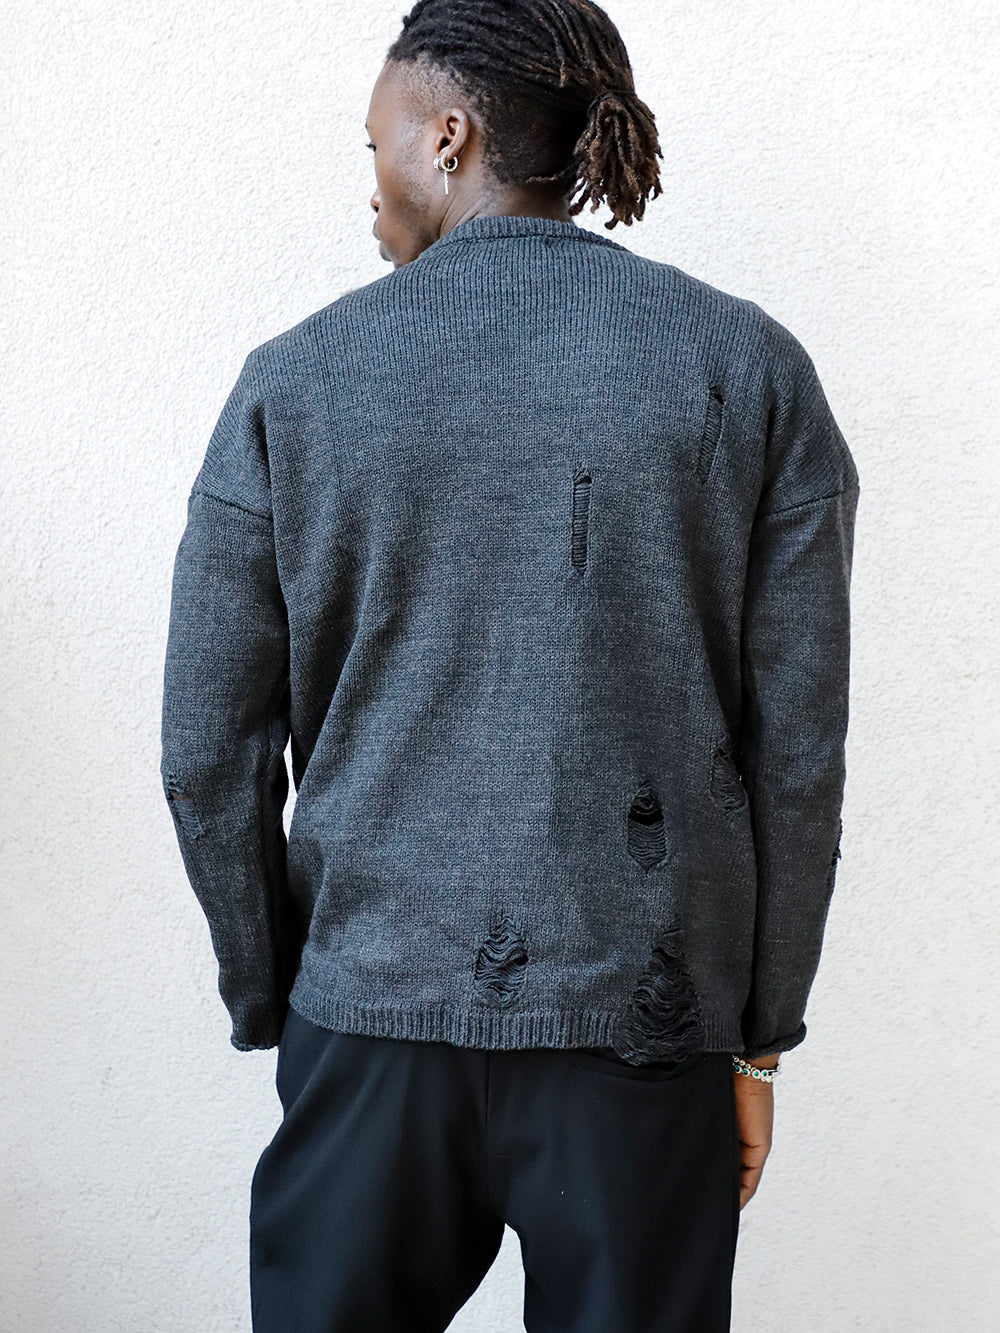 A man with dreadlocks wearing a DISTRESSED GENTLEMAN SWEATER | CHARCOAL and black pants.